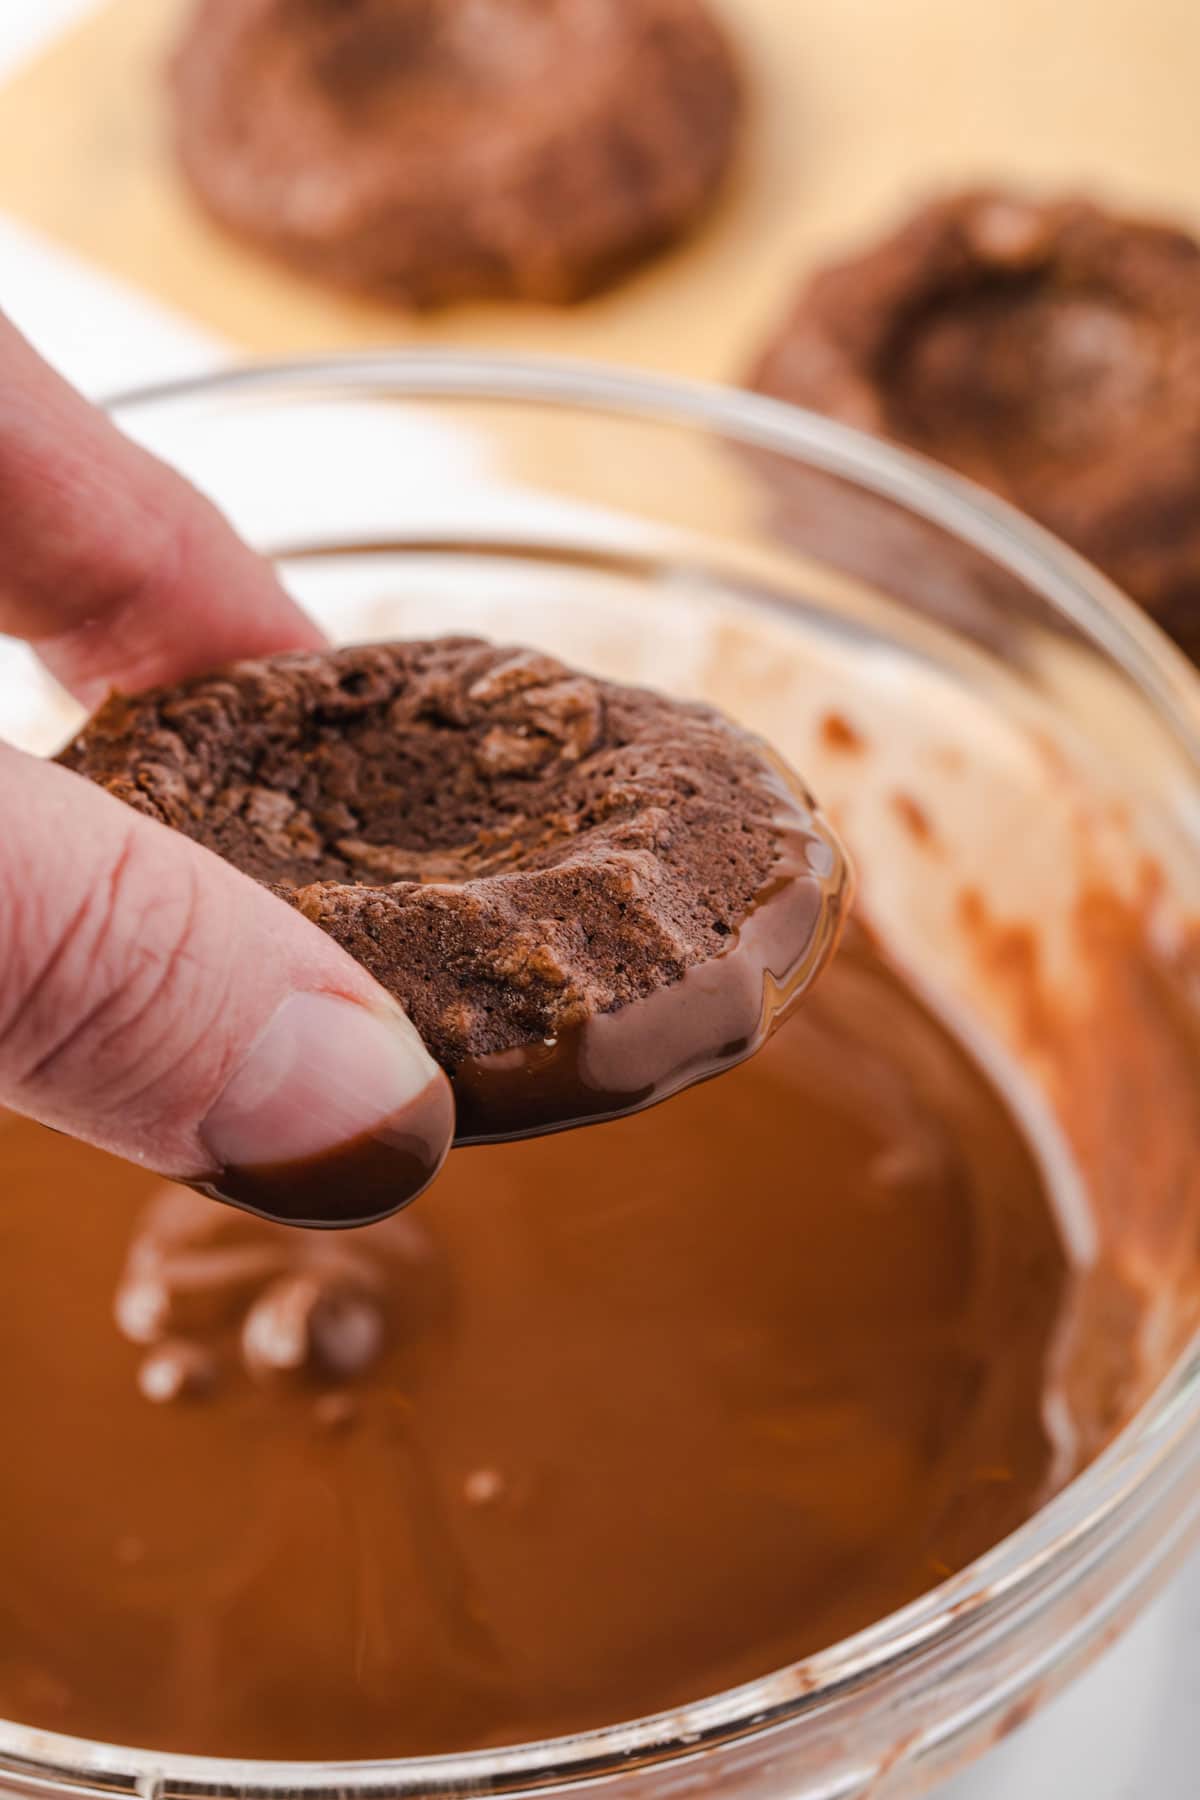 Dipping cookie into melted chocolate.